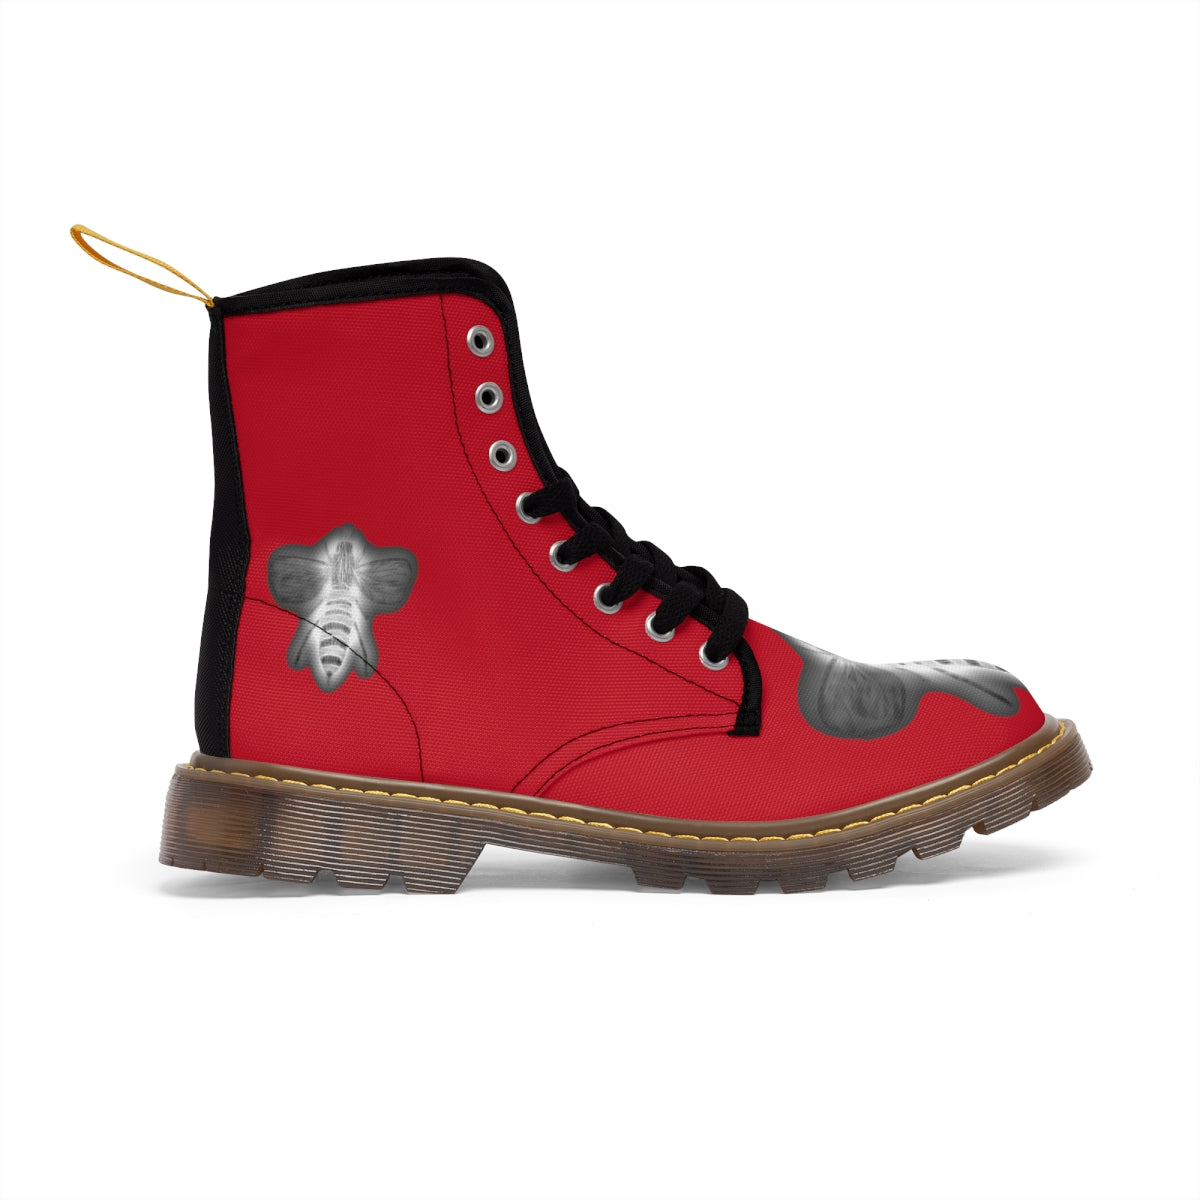 Negative Bee Women's Red Canvas Boots Shoes Bee boots combat boots fun womens boots Negative Bee original art boots Shoes unique womens boots vegan boots vegan combat boots womens boots womens fashion boots womens red boots